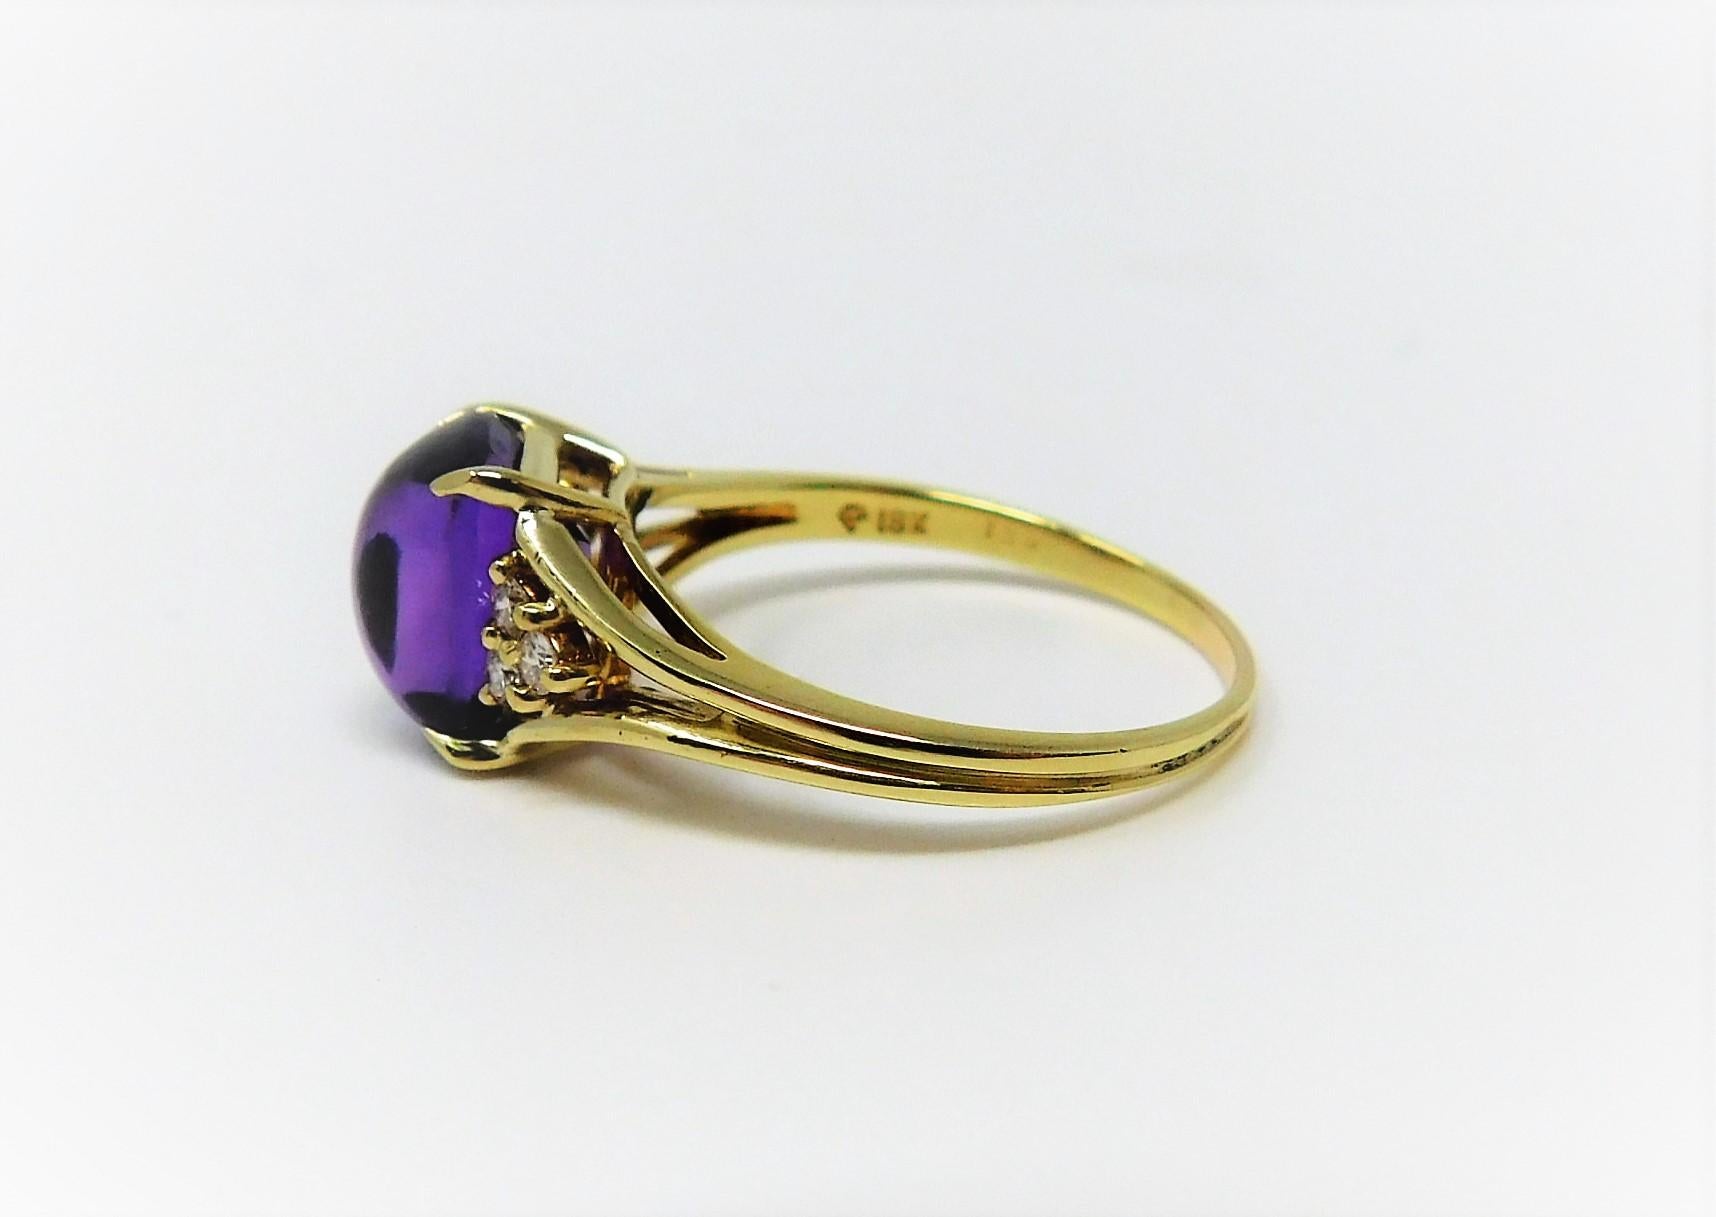 Cabochon Amethyst and Diamond Ring in 18 karat yellow gold. This deep purple cabochon amethyst in complimented with three diamonds on each side.  Size 9.25